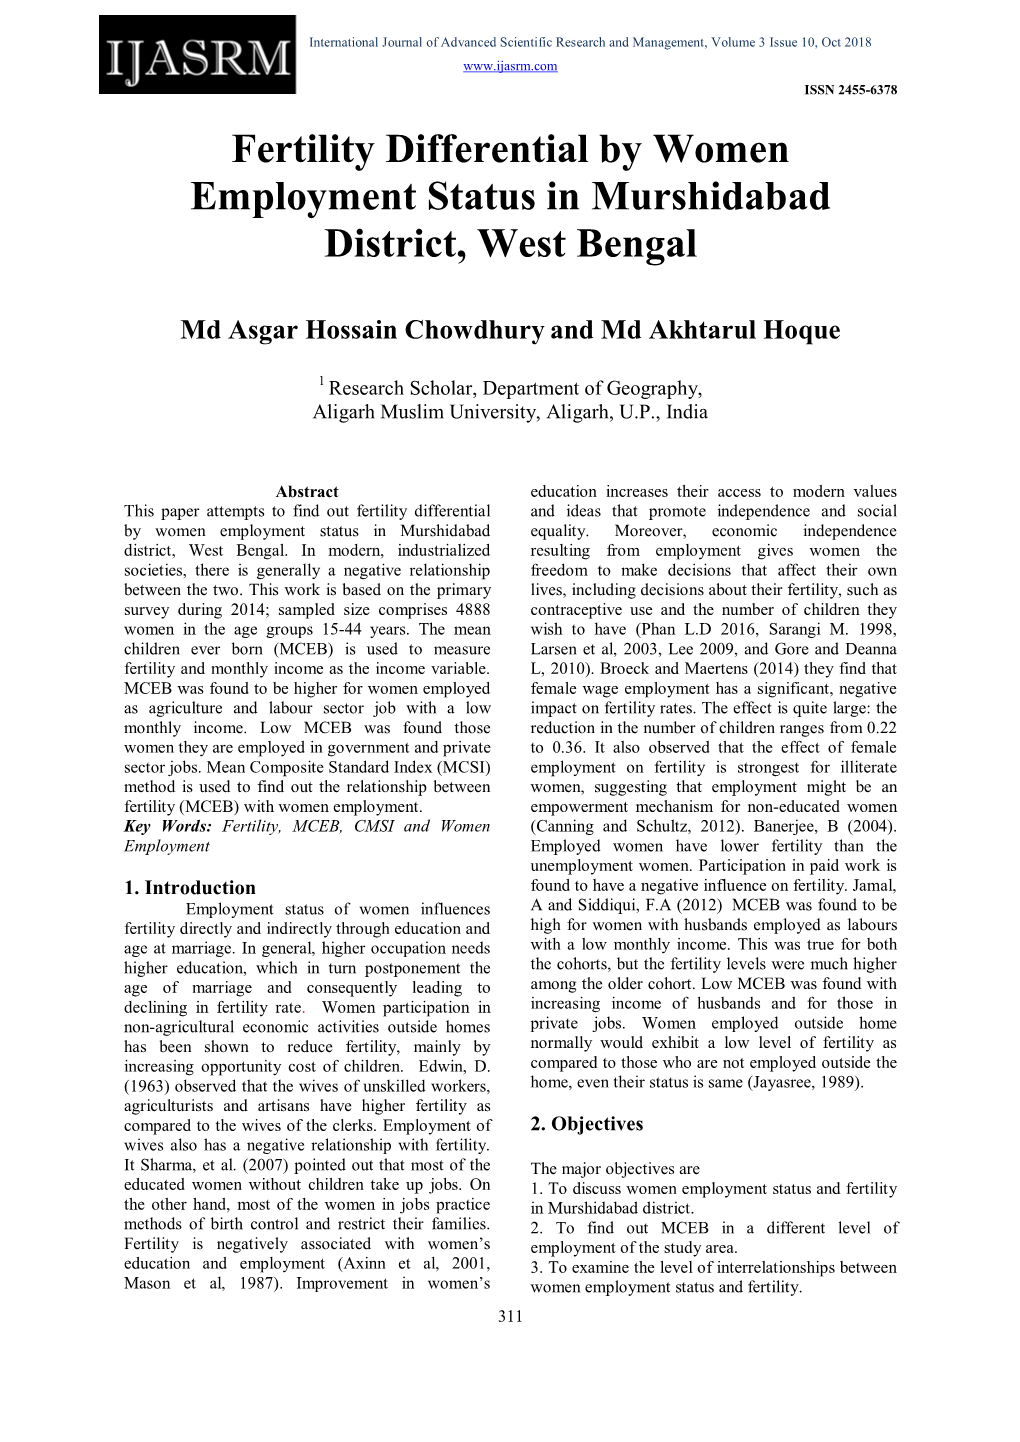 Fertility Differential by Women Employment Status in Murshidabad District, West Bengal